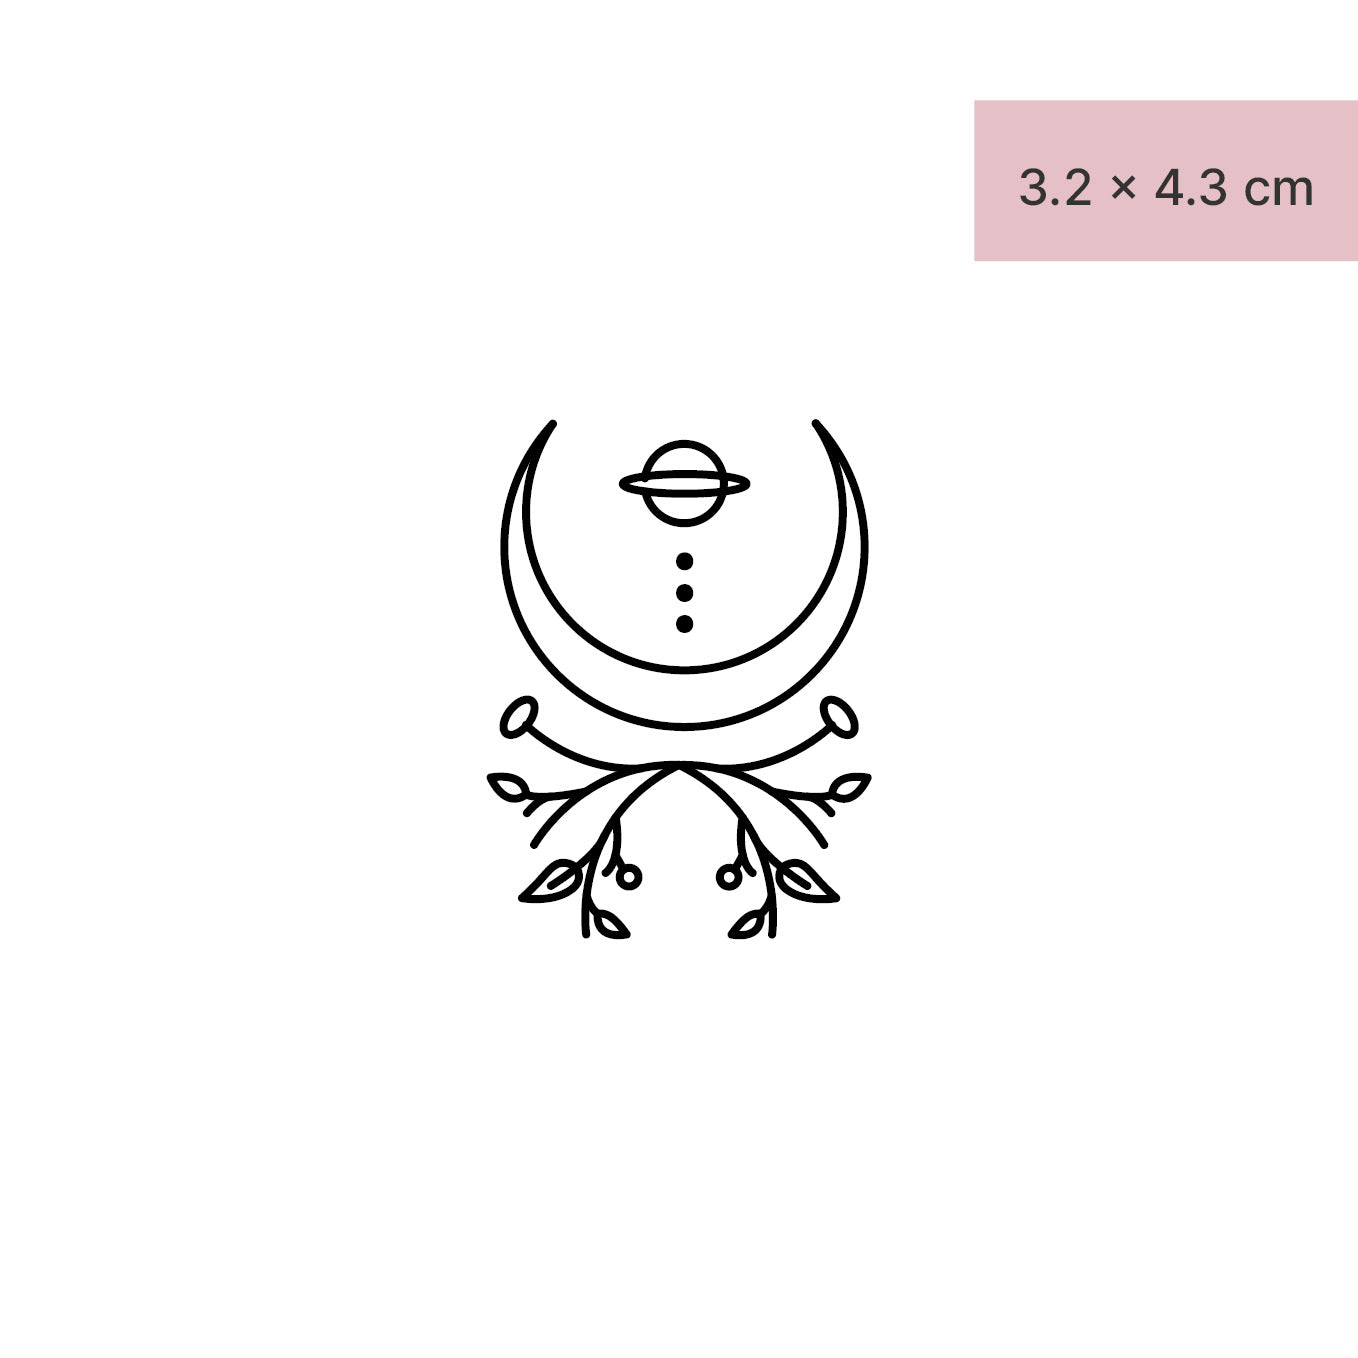 Set Of 5 Water Transfer Nordic Temporary Tattoos For Boys And Girls Earth,  Star, Moon, Galaxy, Cute Black Lines Small Size Fake Tatto Stickers Z0403  From Misihan09, $3.74 | DHgate.Com